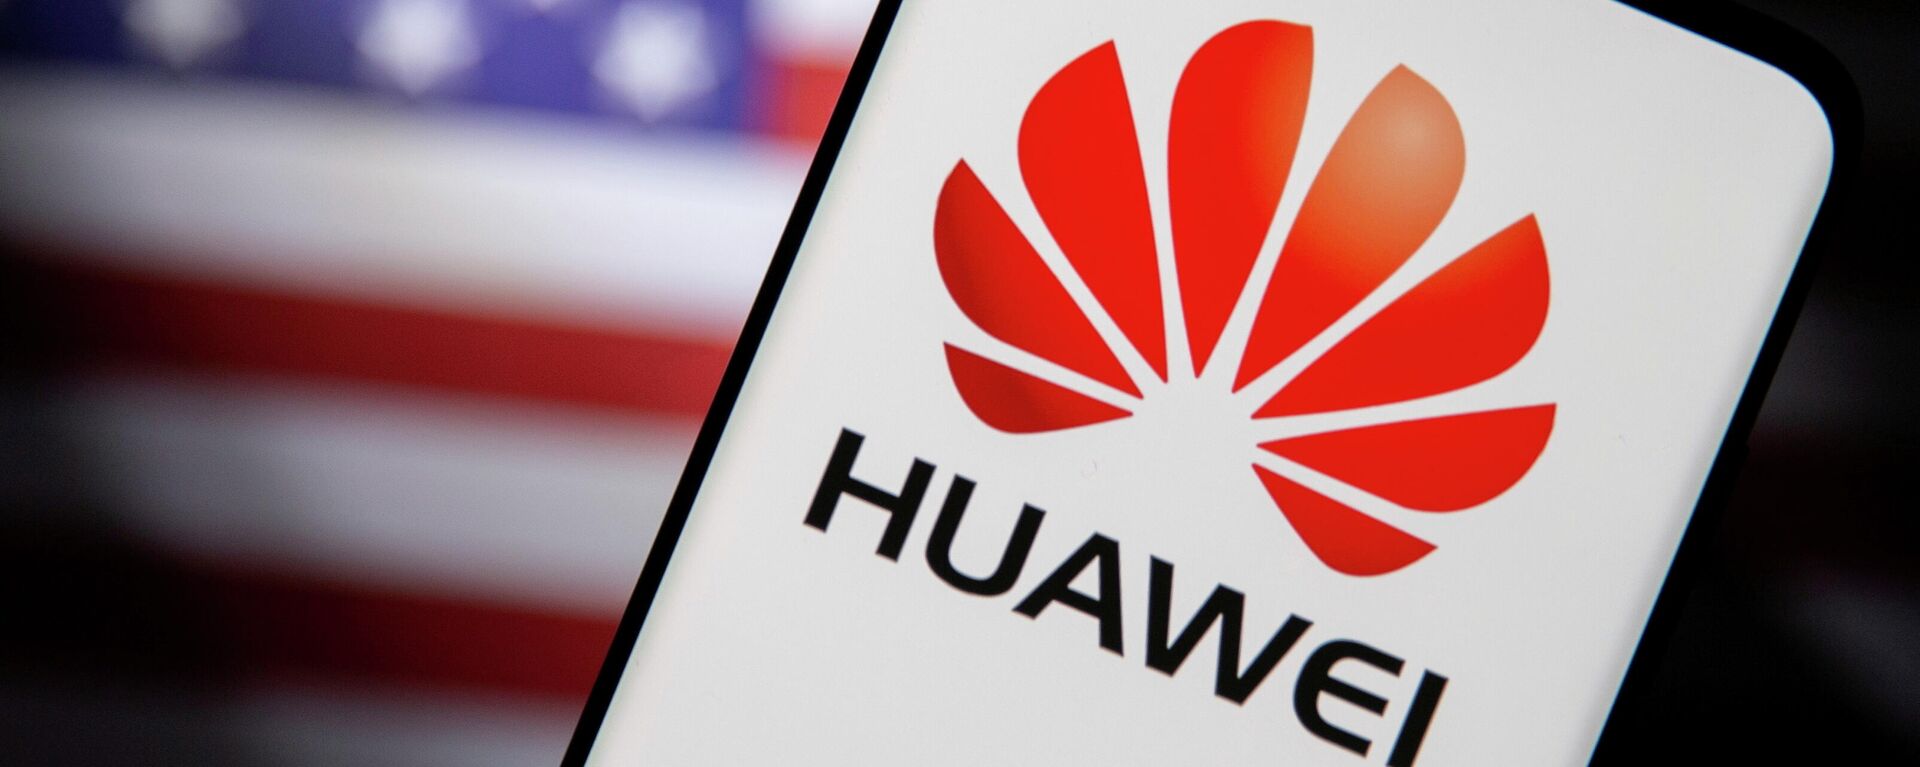 Smartphone with a Huawei logo is seen in front of a U.S. flag in this illustration taken September 28, 2021 - Sputnik International, 1920, 12.11.2021